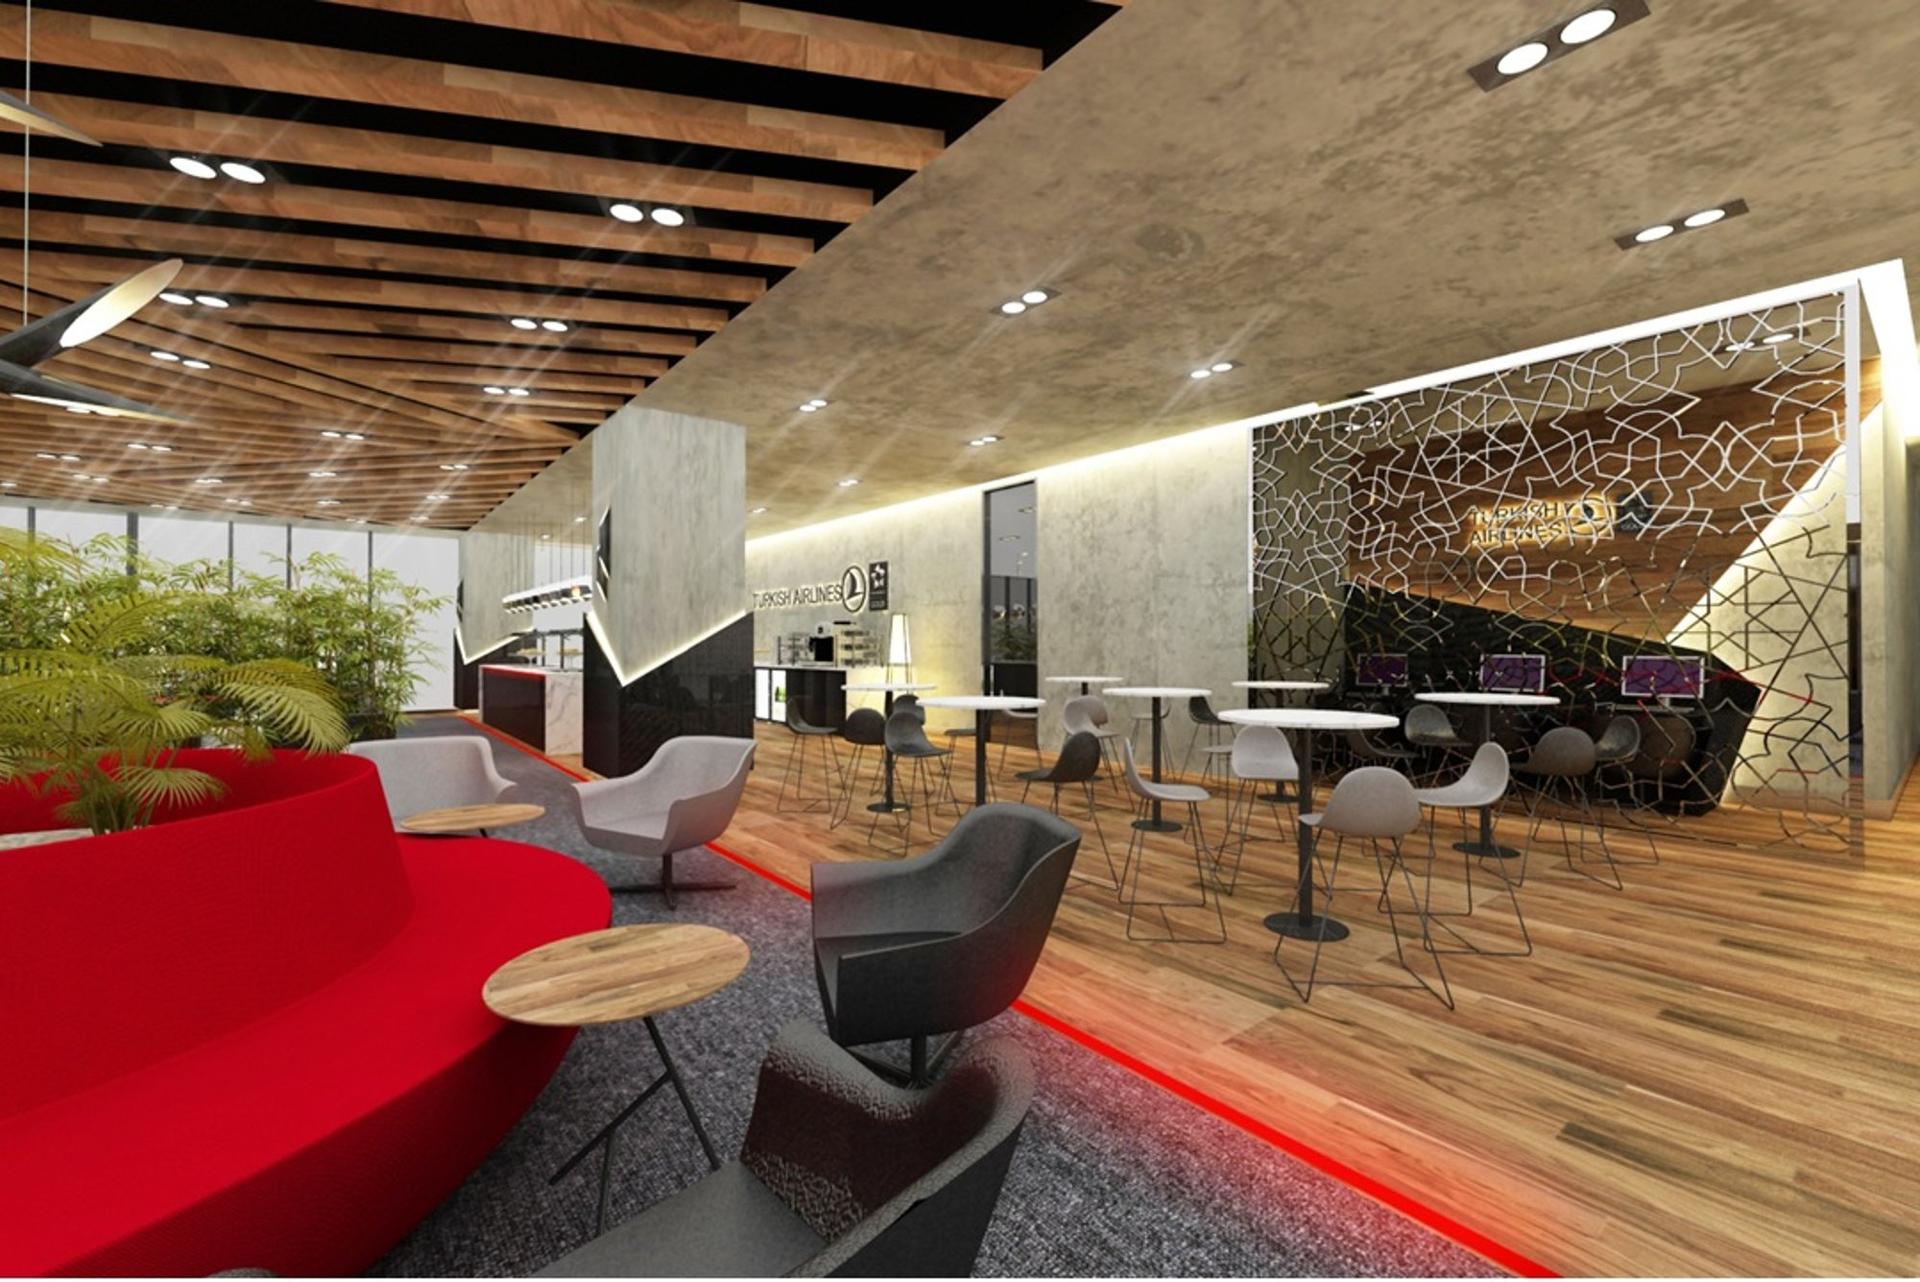 Turkish Airlines CIP Lounge (Business Lounge) image 18 of 27